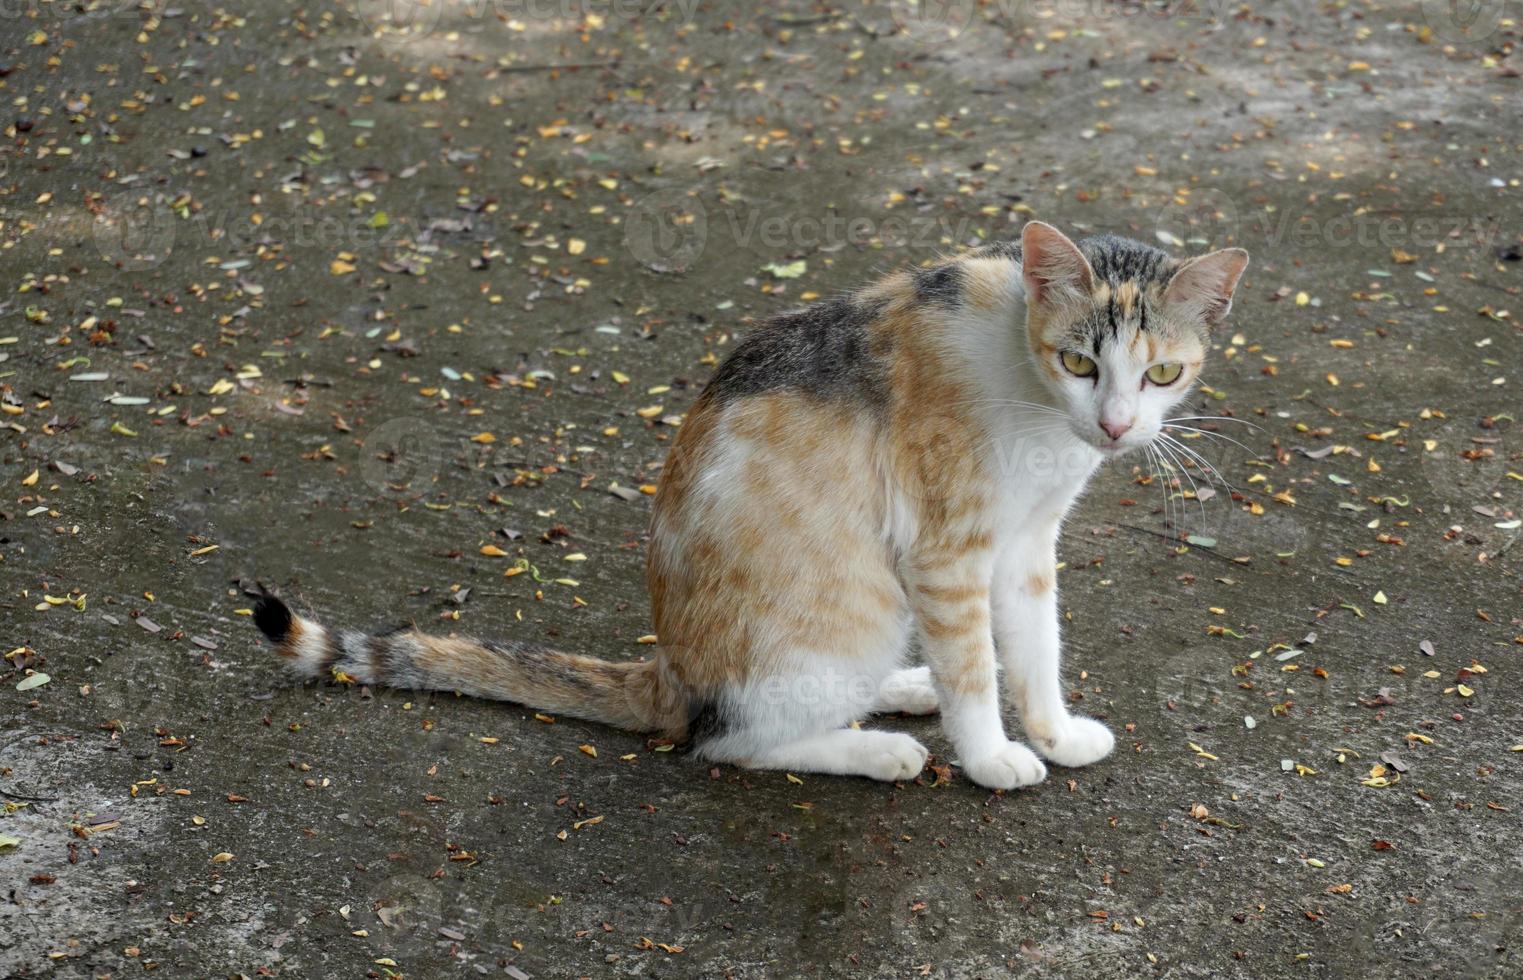 Calico cat consists of 3 main shades, orange, black and white, but all three shades have different intensity and lightness. This makes the world no two tricolored cats with the same pattern. photo